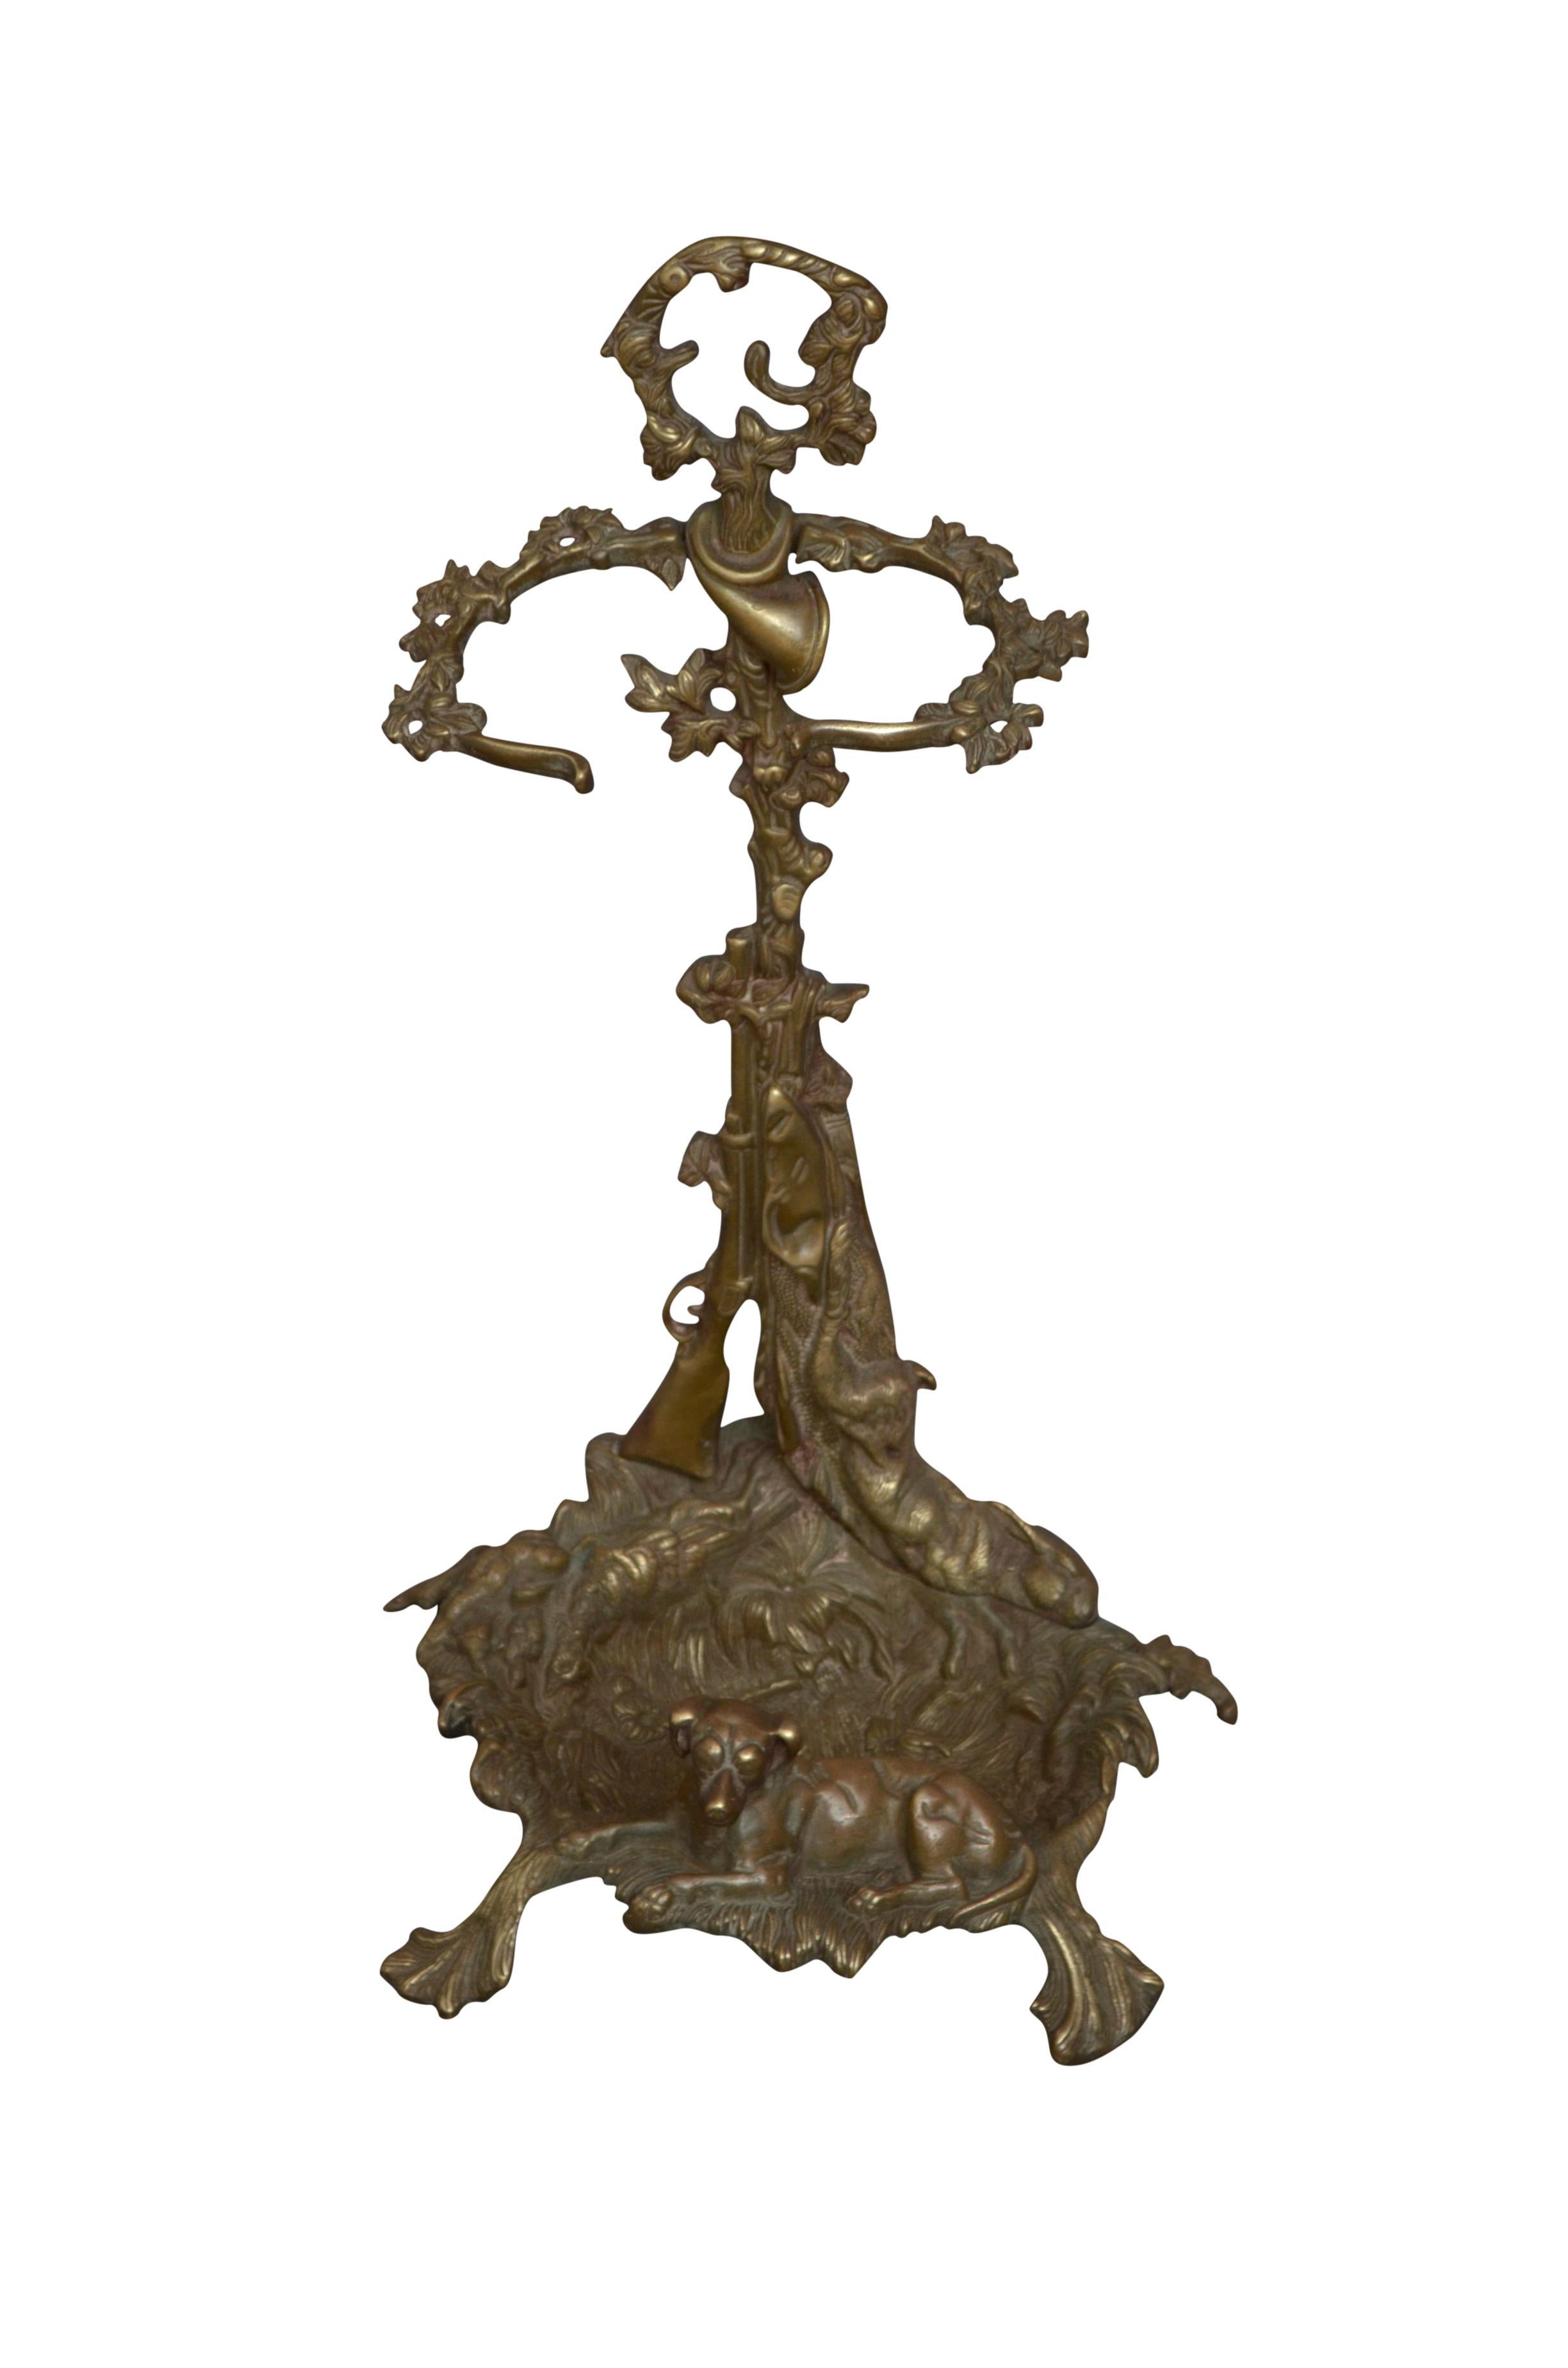 K0551 Vintage brass fire irons stand with tongs, shovel and poker, the stand depicts hunting scene with a dog, hare and foliage, all in excellent condition with minor historic repairs, ready to place at home. The This antique stand would make a good